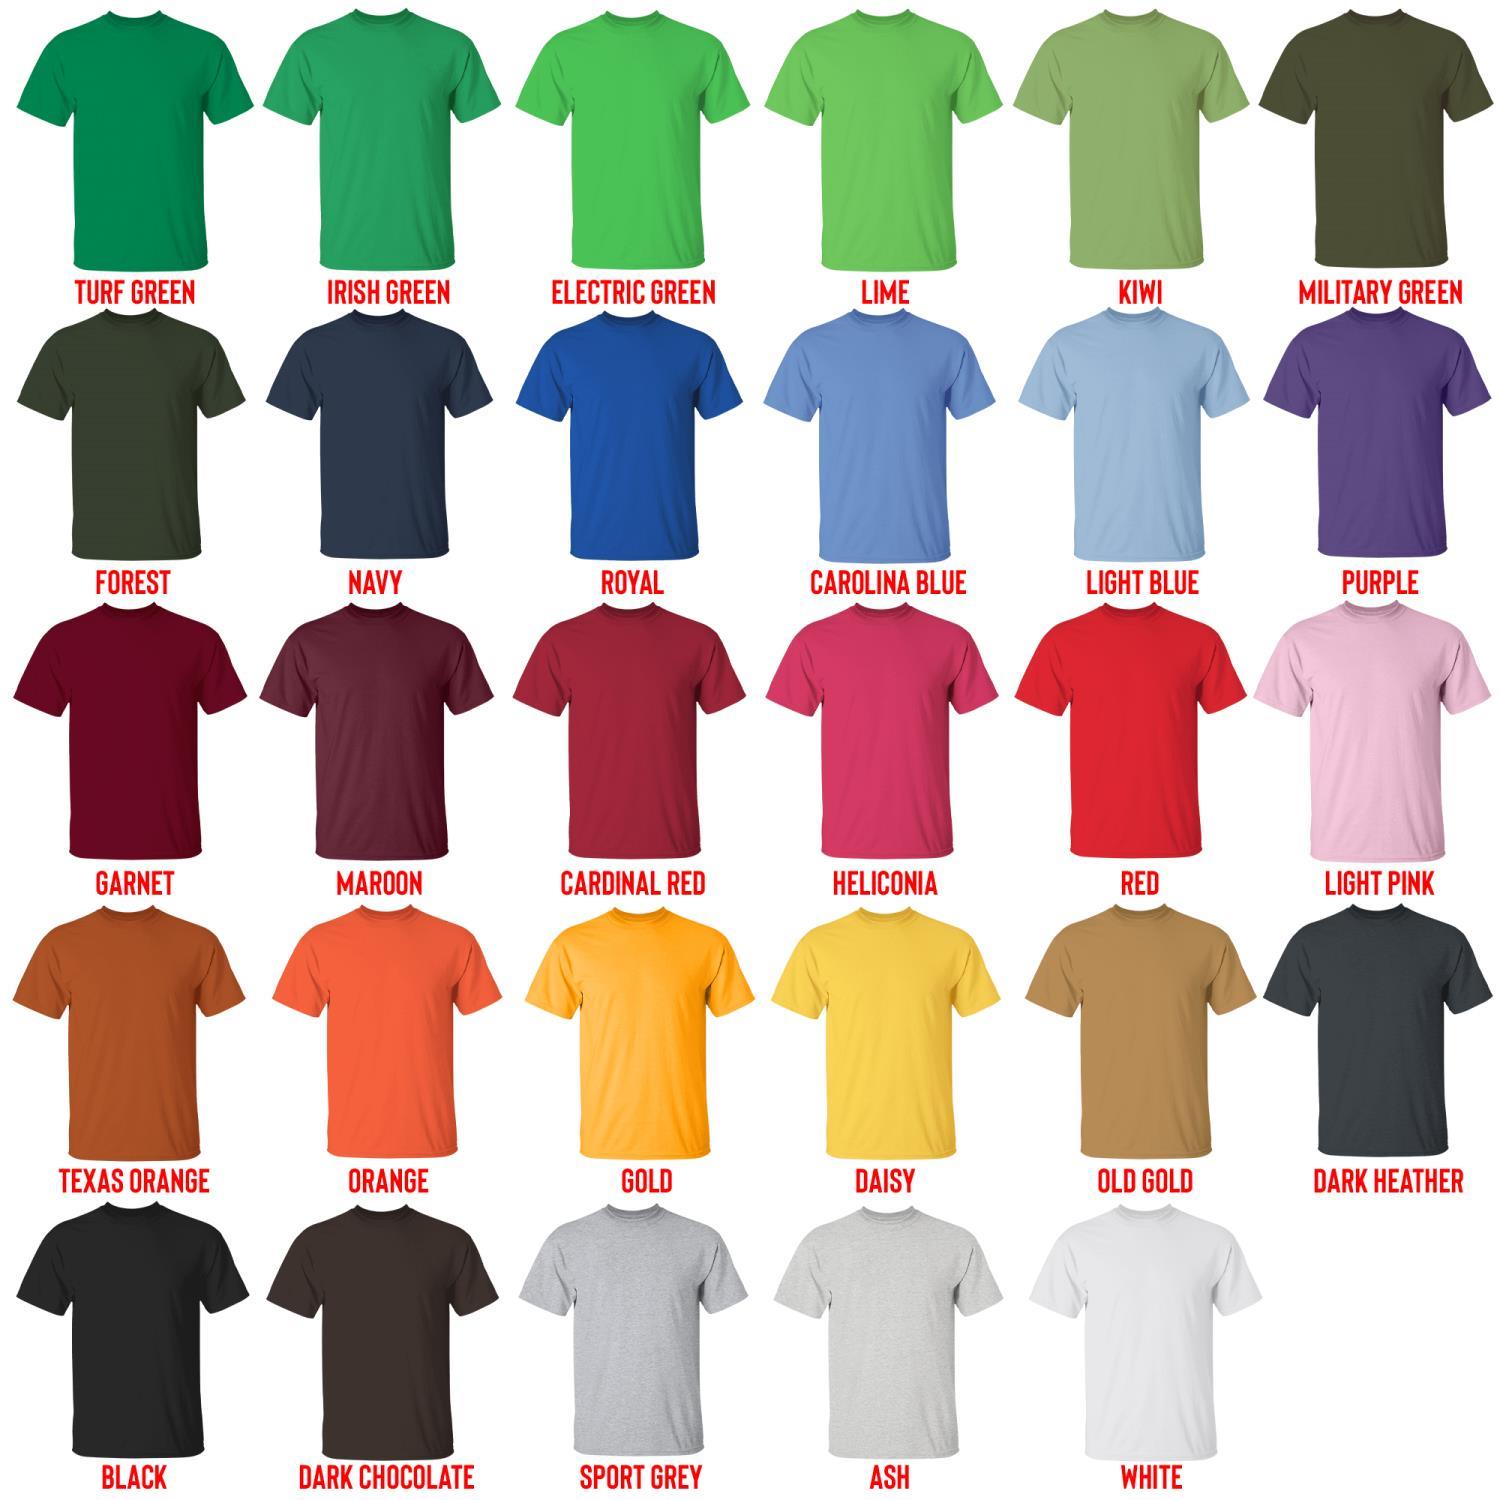 t shirt color chart - SK8 the Infinity Store